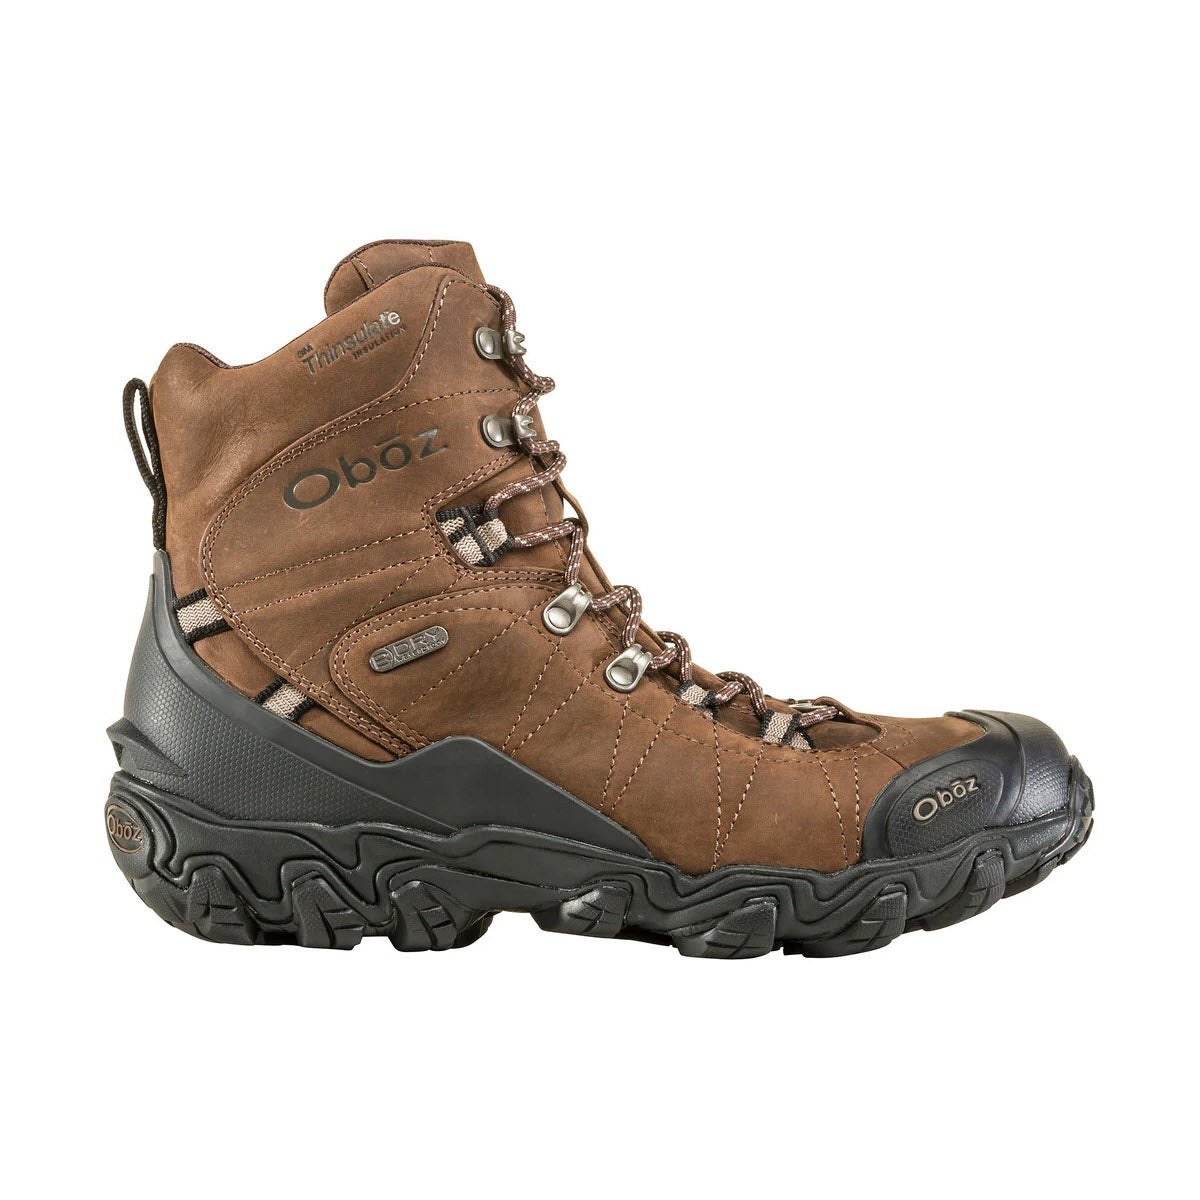 A single Oboz BRIDGER 8&quot; INSULATED B-DRY BARK hiking boot featuring a high-top design, brown leather upper, and a sturdy black winterized rubber outsole, shown against a white background.